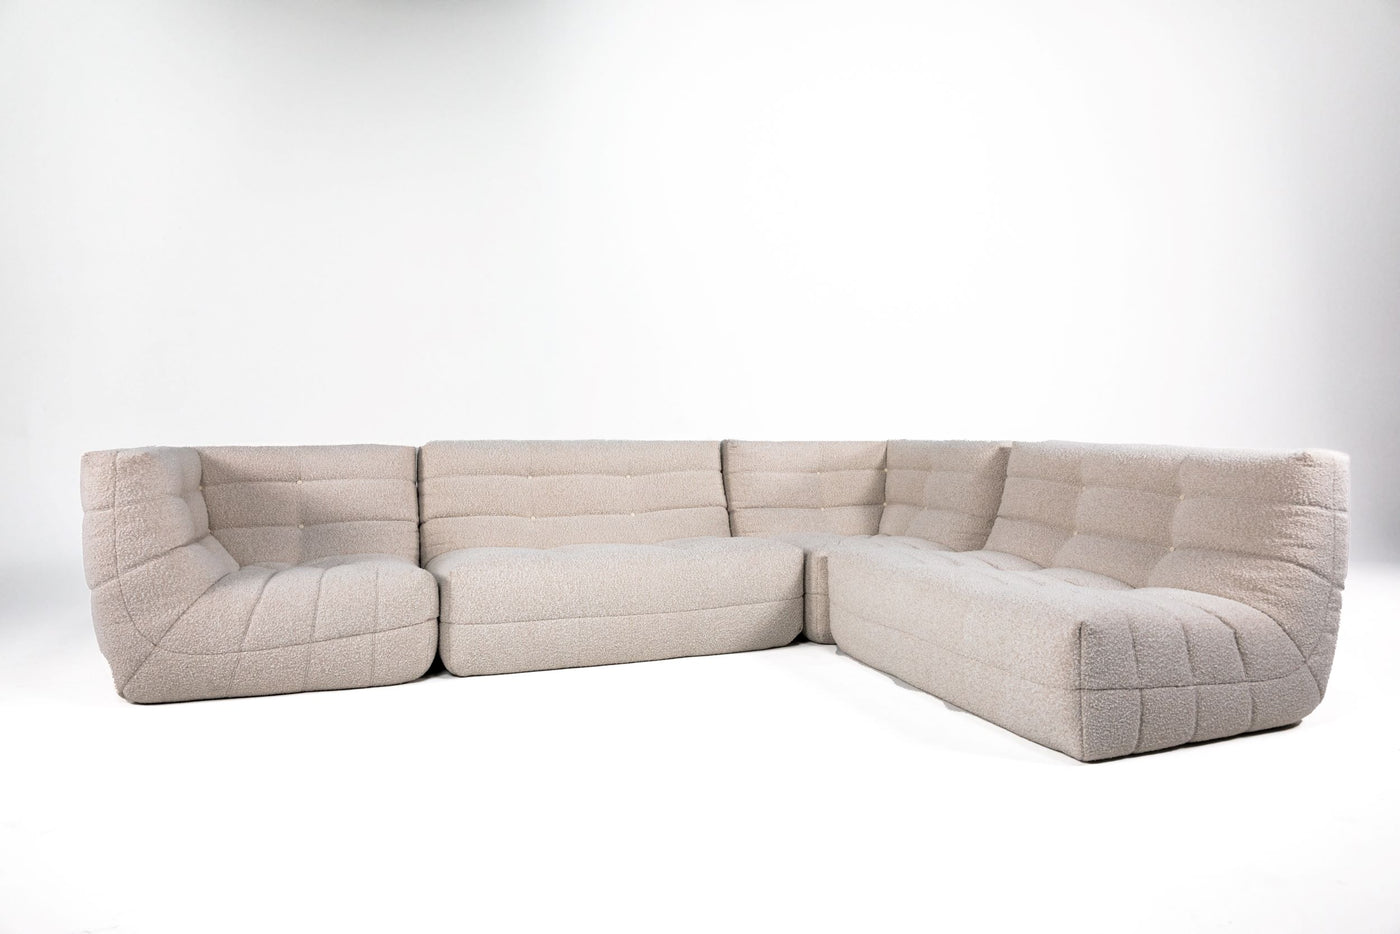 Russo2 (4 piece L & day bed / sofa)